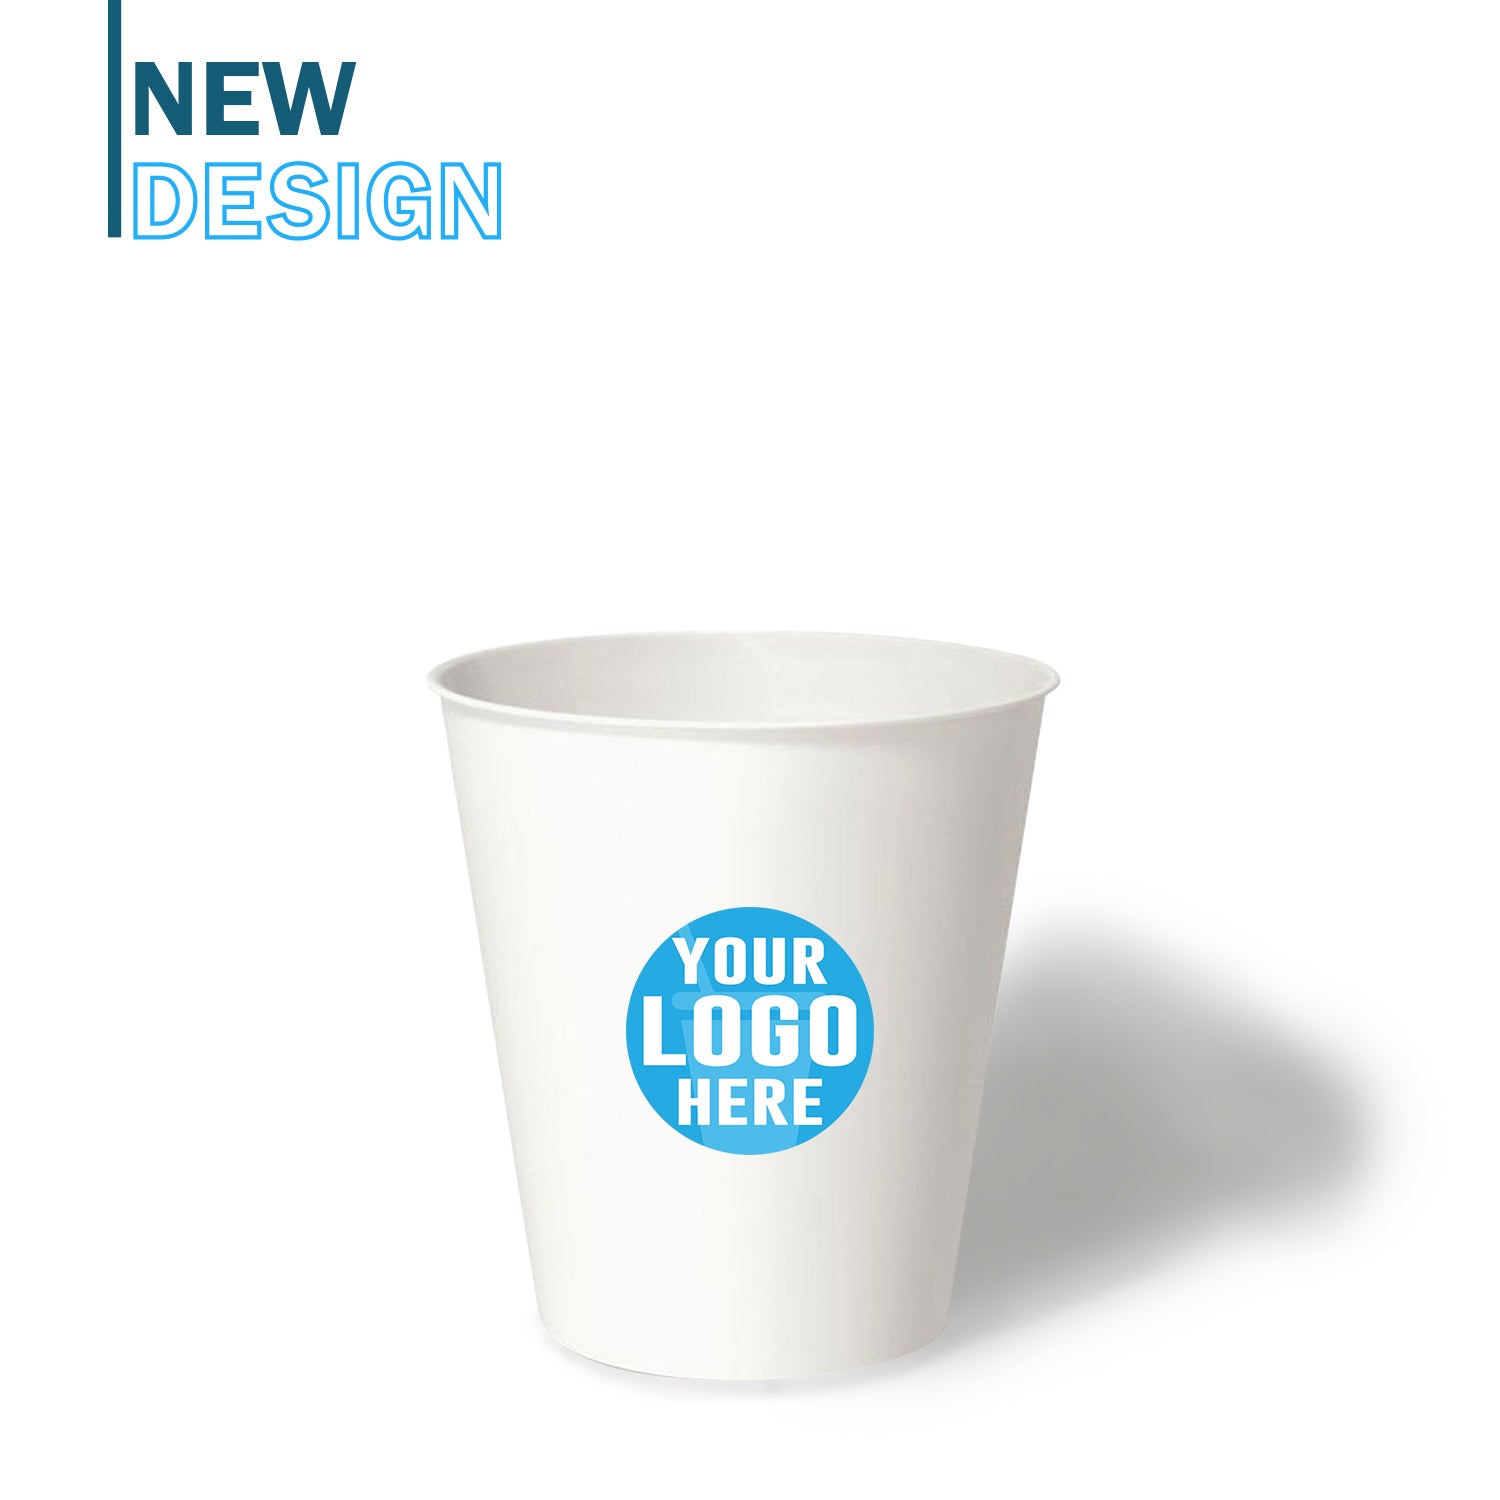 Paper Cups printed with your logo!